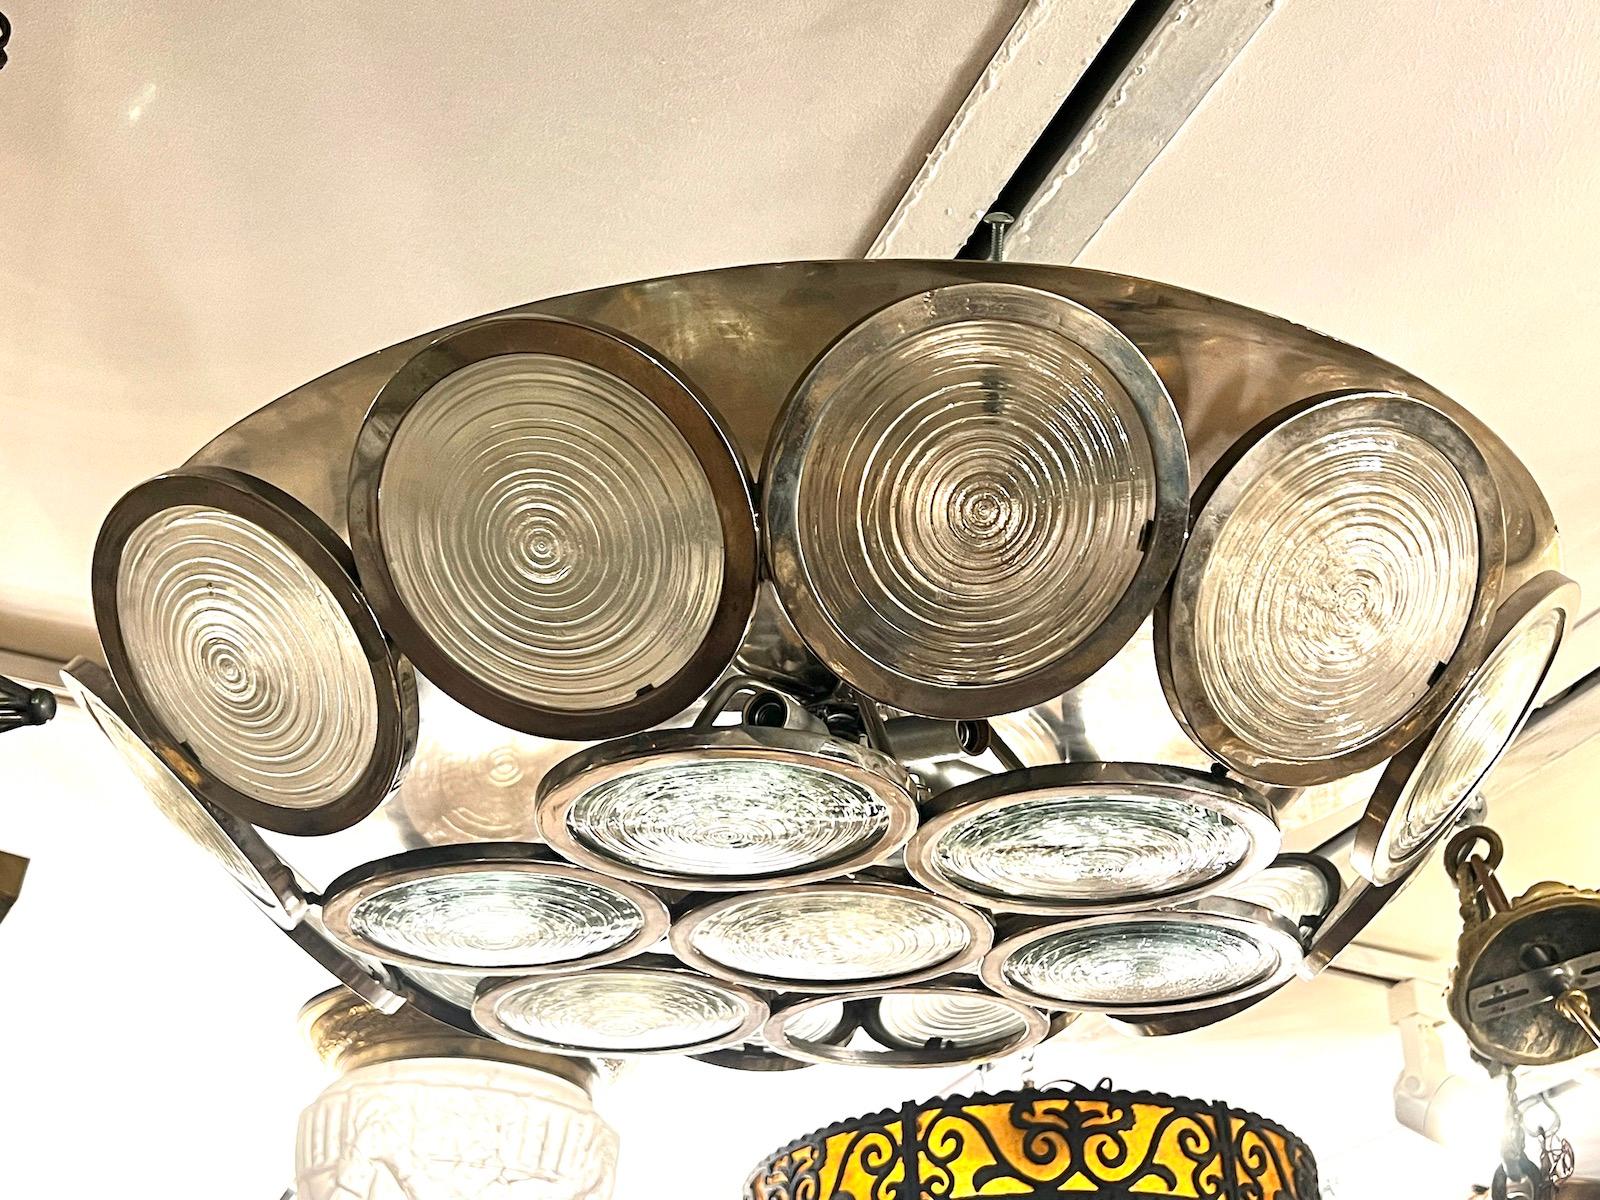 A circa 1960's Italian moderne style nickel-plated flush mount fixture with six interior lights.

Measurements:
Drop: 6